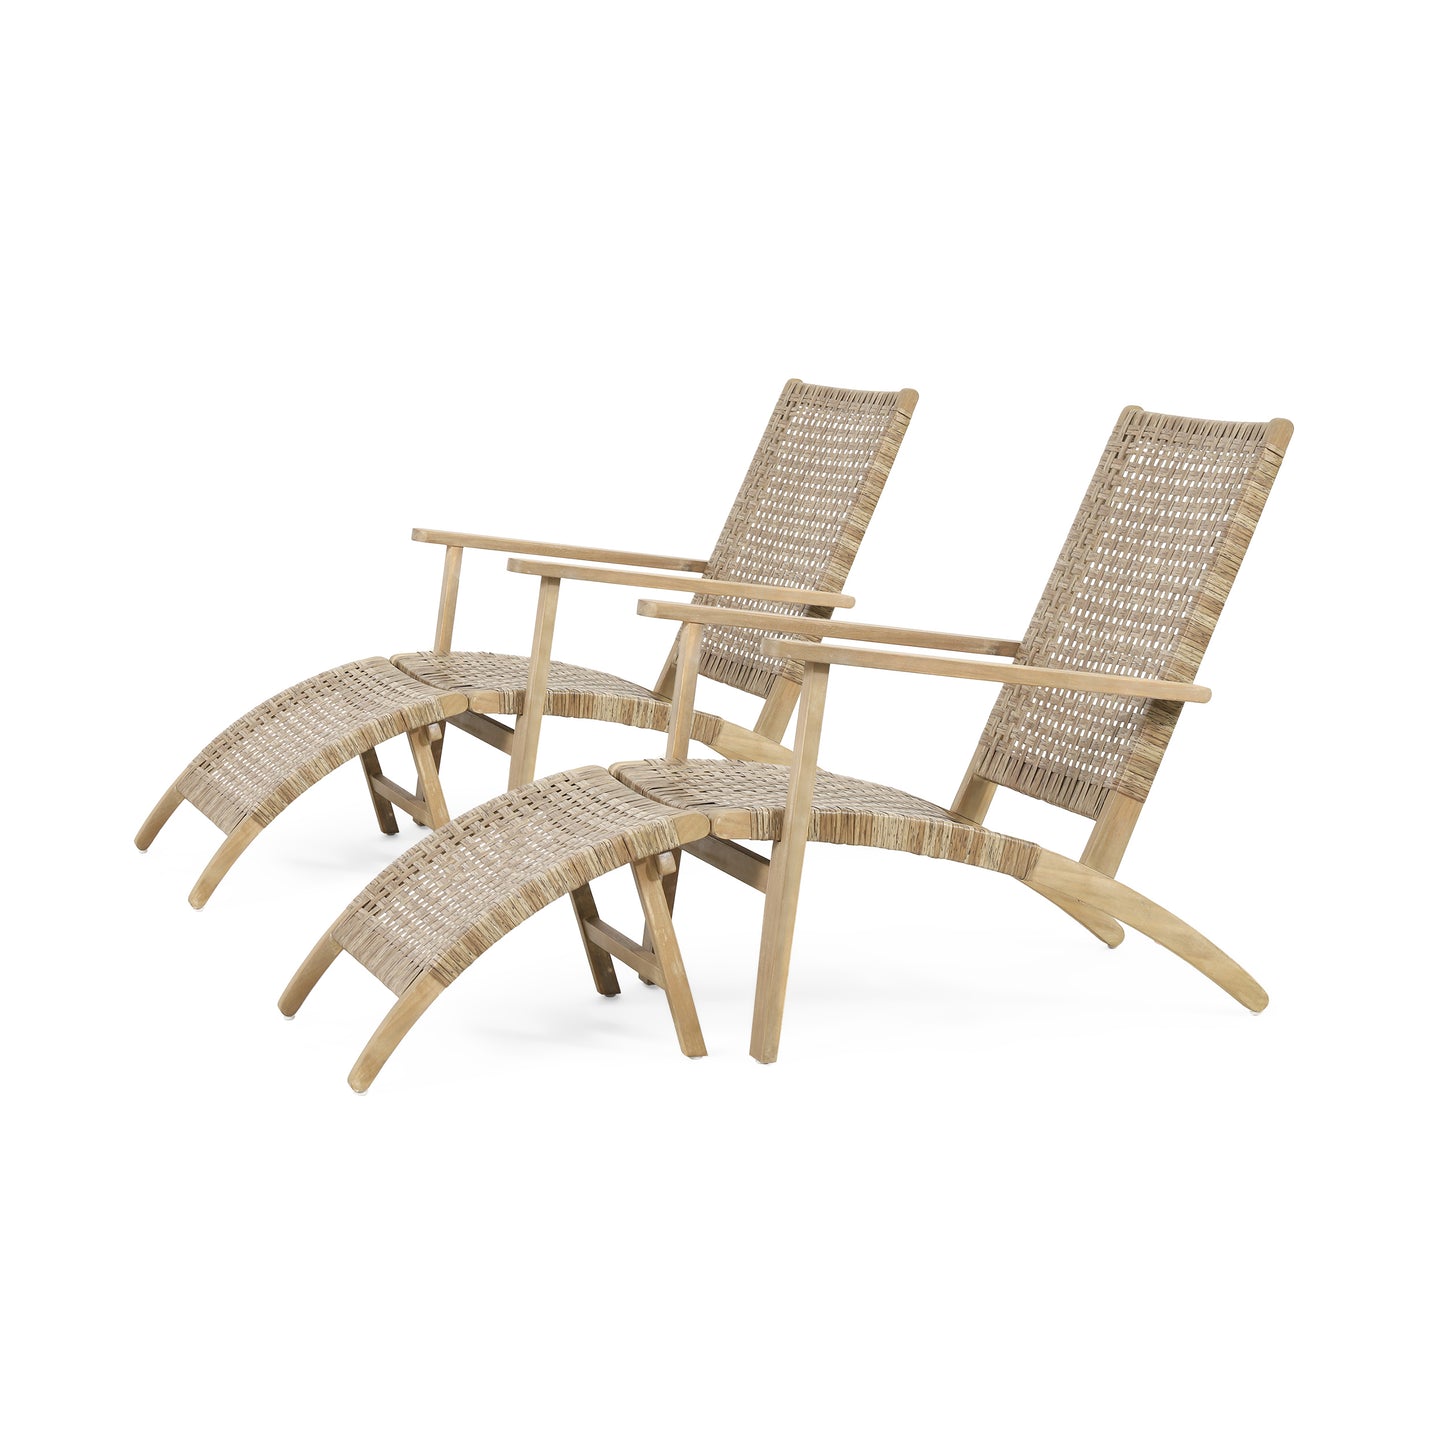 Arlost Outdoor Wicker Lounge Chairs with Ottoman, Set of 2, Light Brown and Light Multibrown